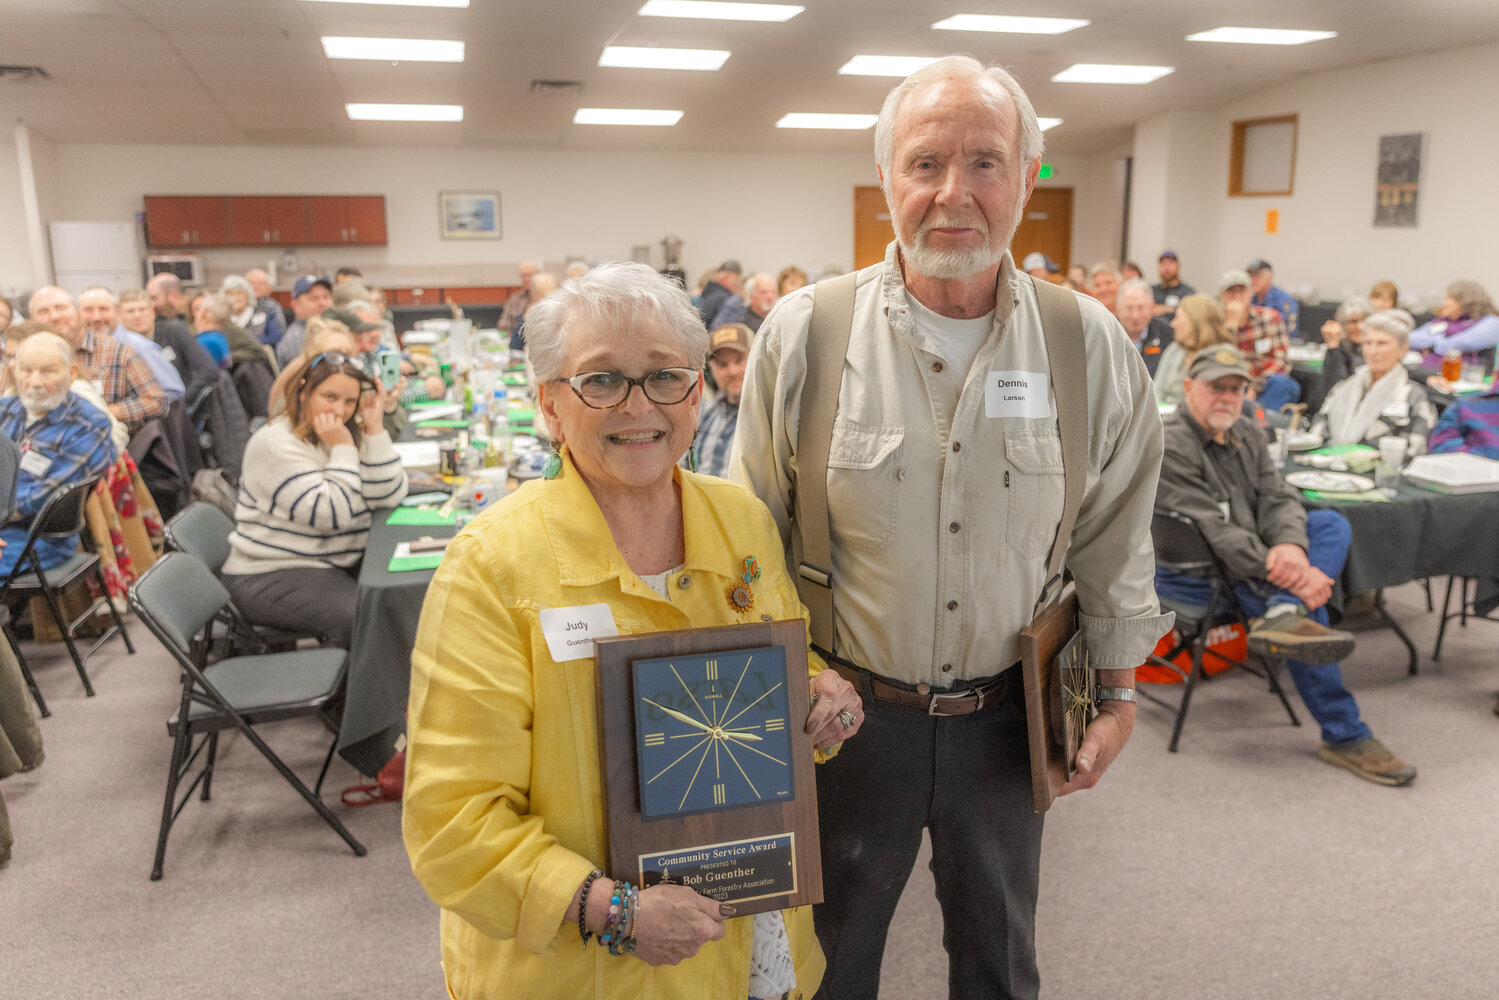 Judy Guenther and Dennis Larson pose for a photo with their awards during the Lewis County Farm Forestry Association awards banquet in Chehalis on Tuesday, Nov. 14.